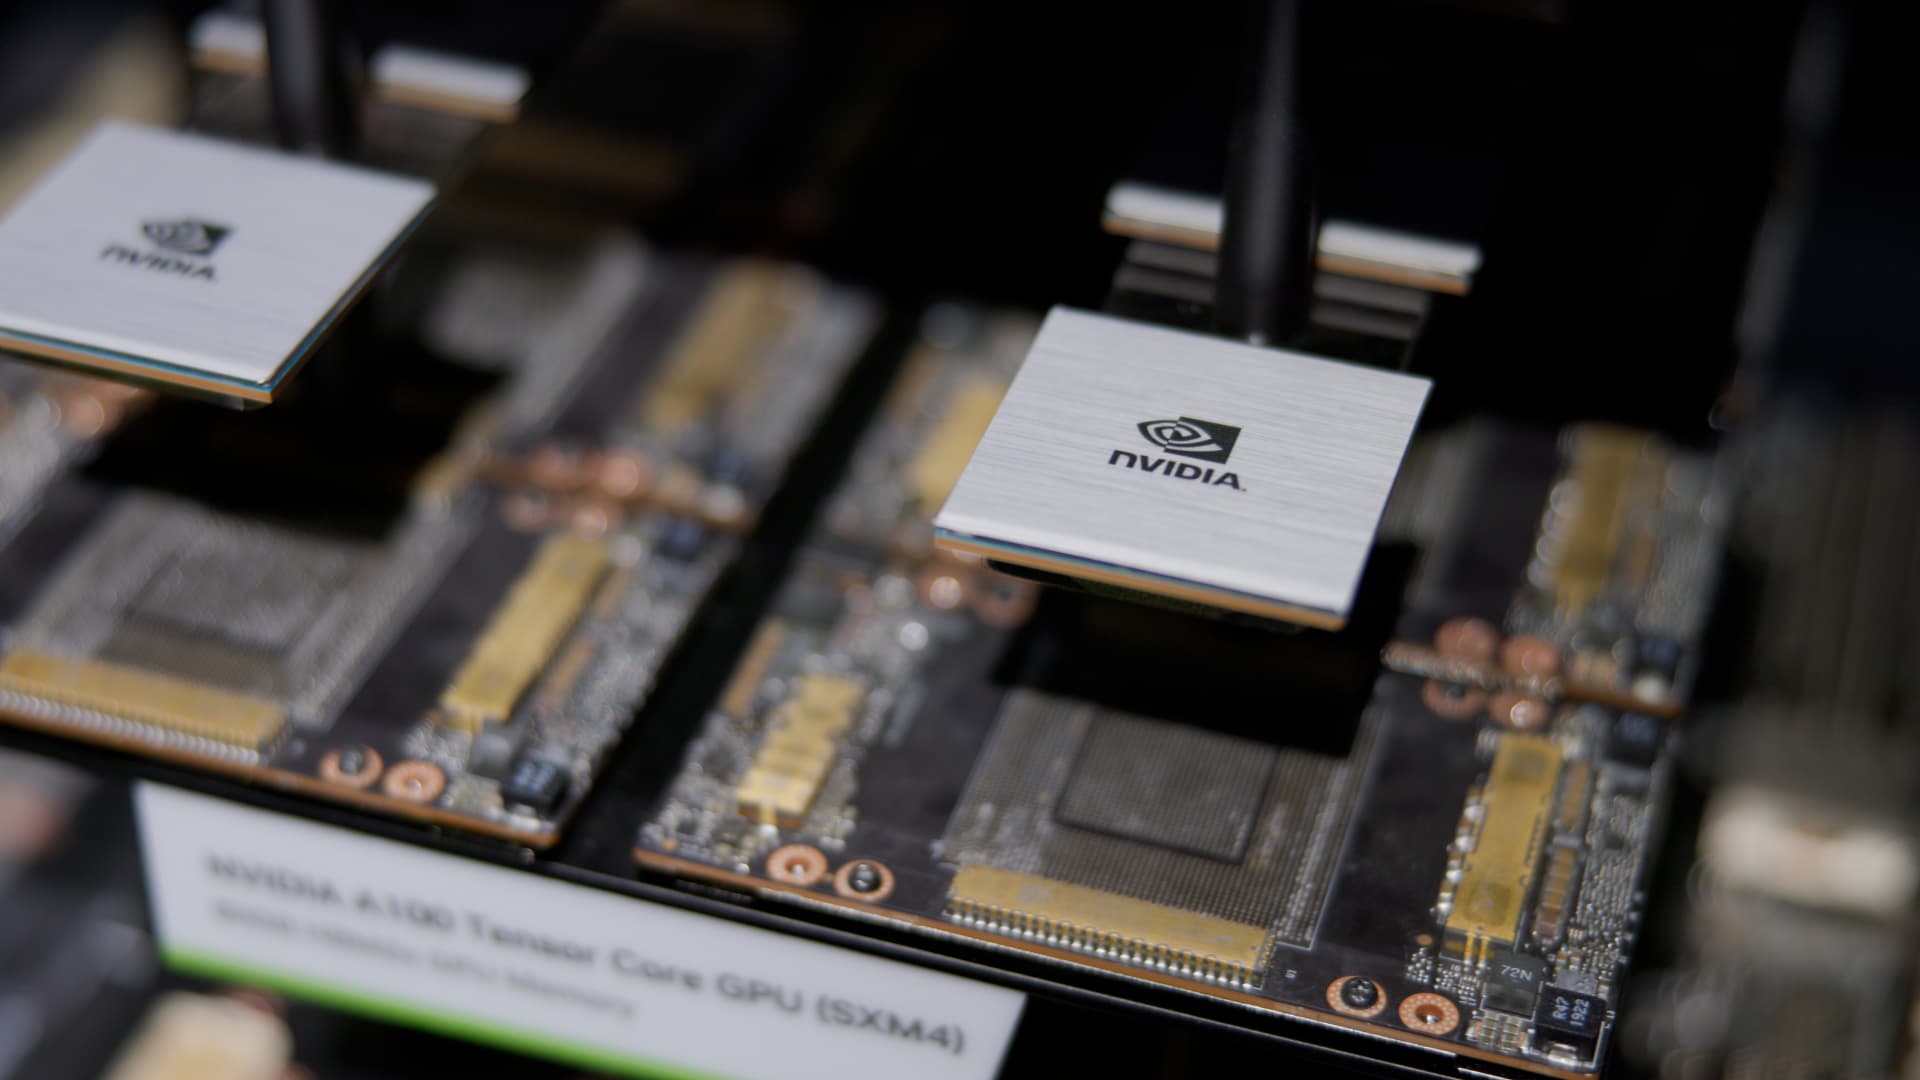 Is Nvidia’s high rating justified?  A cautious fund manager gives two reasons to own the stock